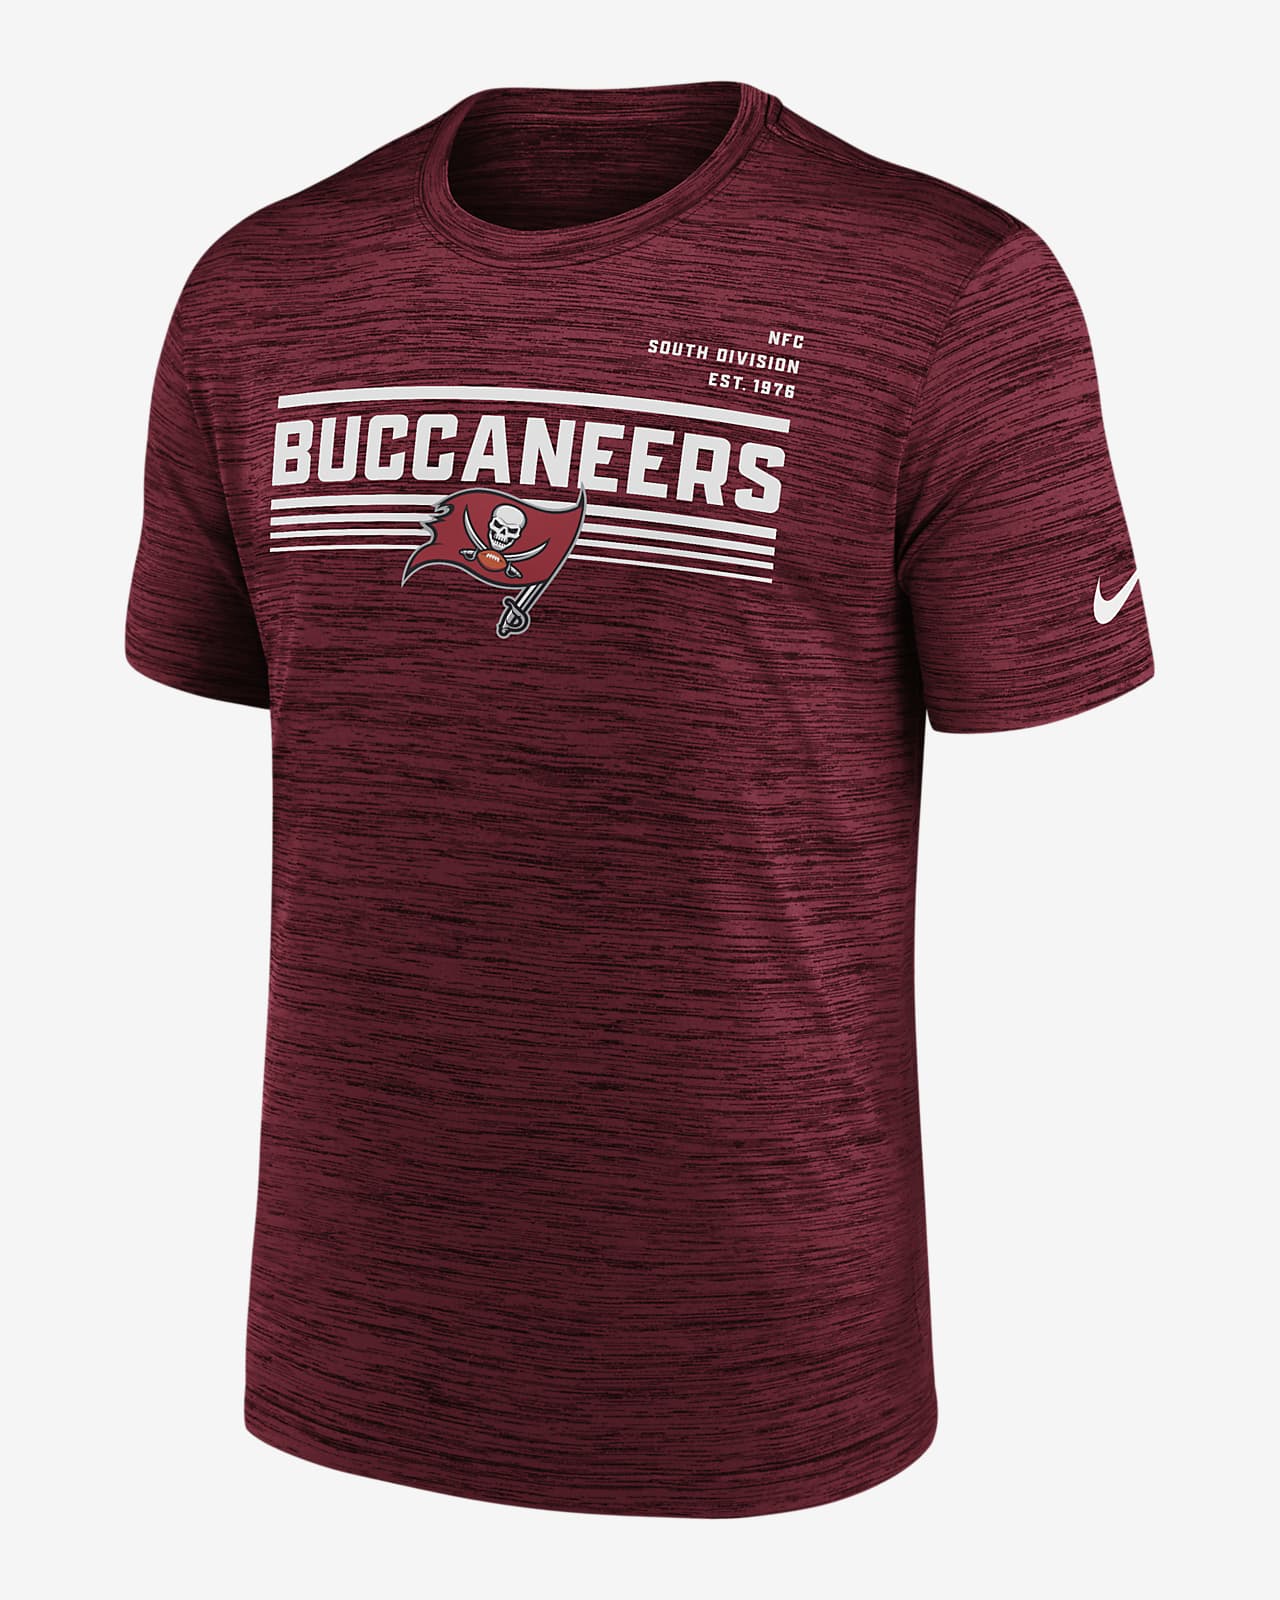 Men's Nike Red Tampa Bay Buccaneers Velocity Arch Performance T-Shirt Size: Medium